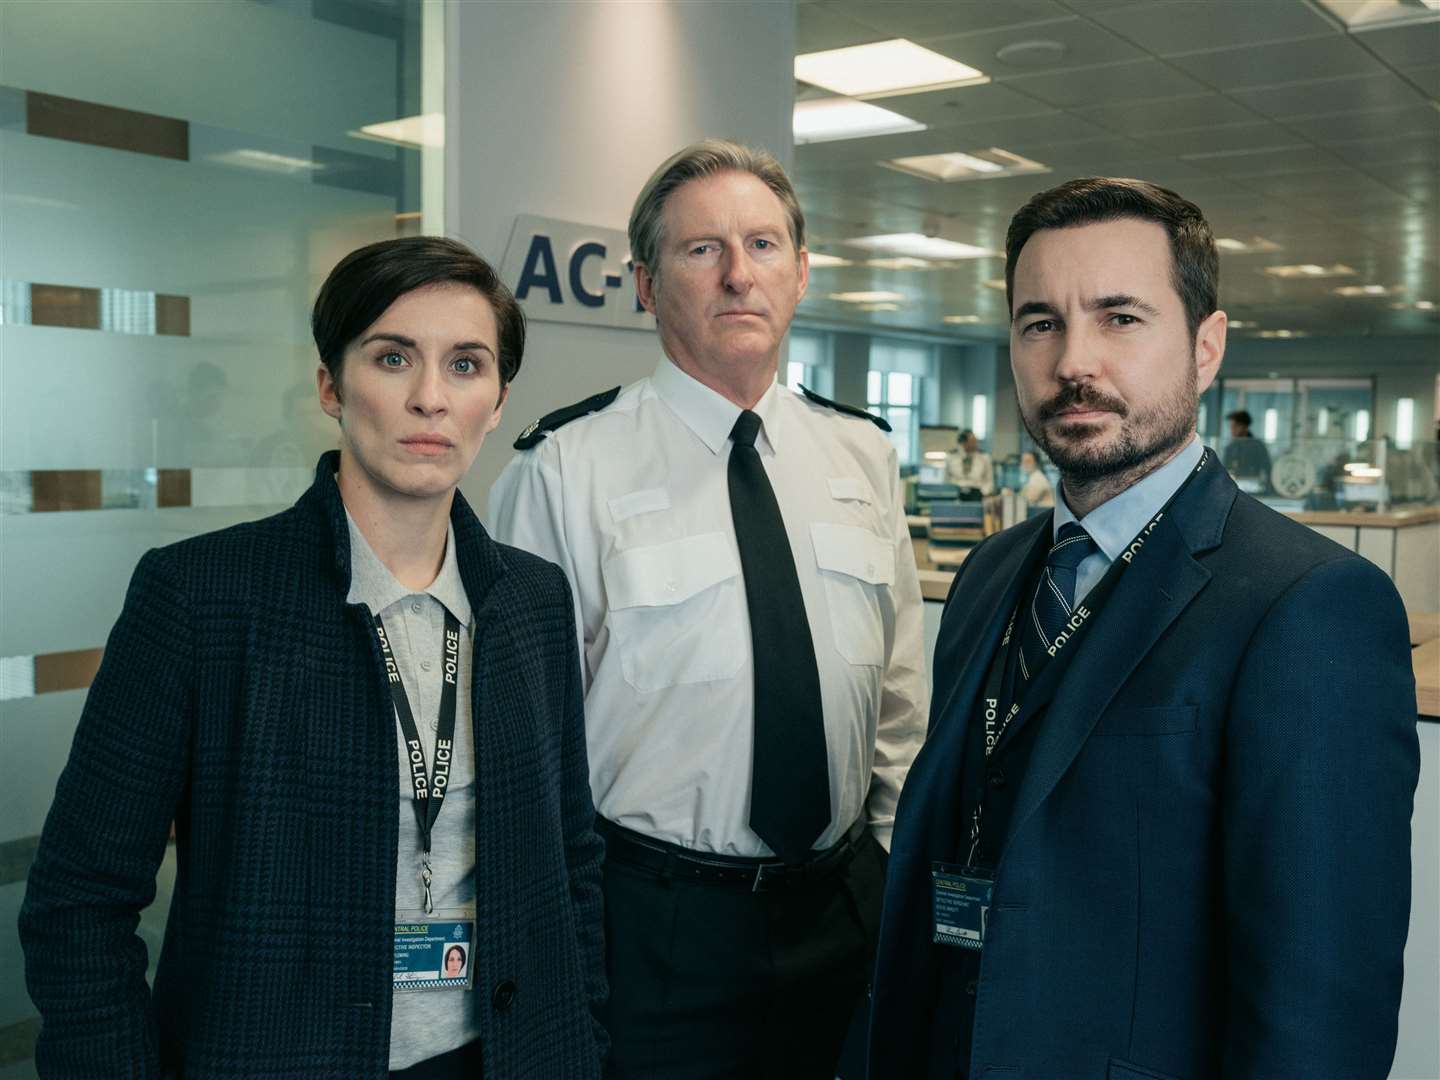 Line Of Duty stars, from left, Vicky Mcclure as detective sergeant Kate Fleming, Adrian Dunbar as superintendent Ted Hastings and Martin Compston as detective sergeant Steve Arnott.